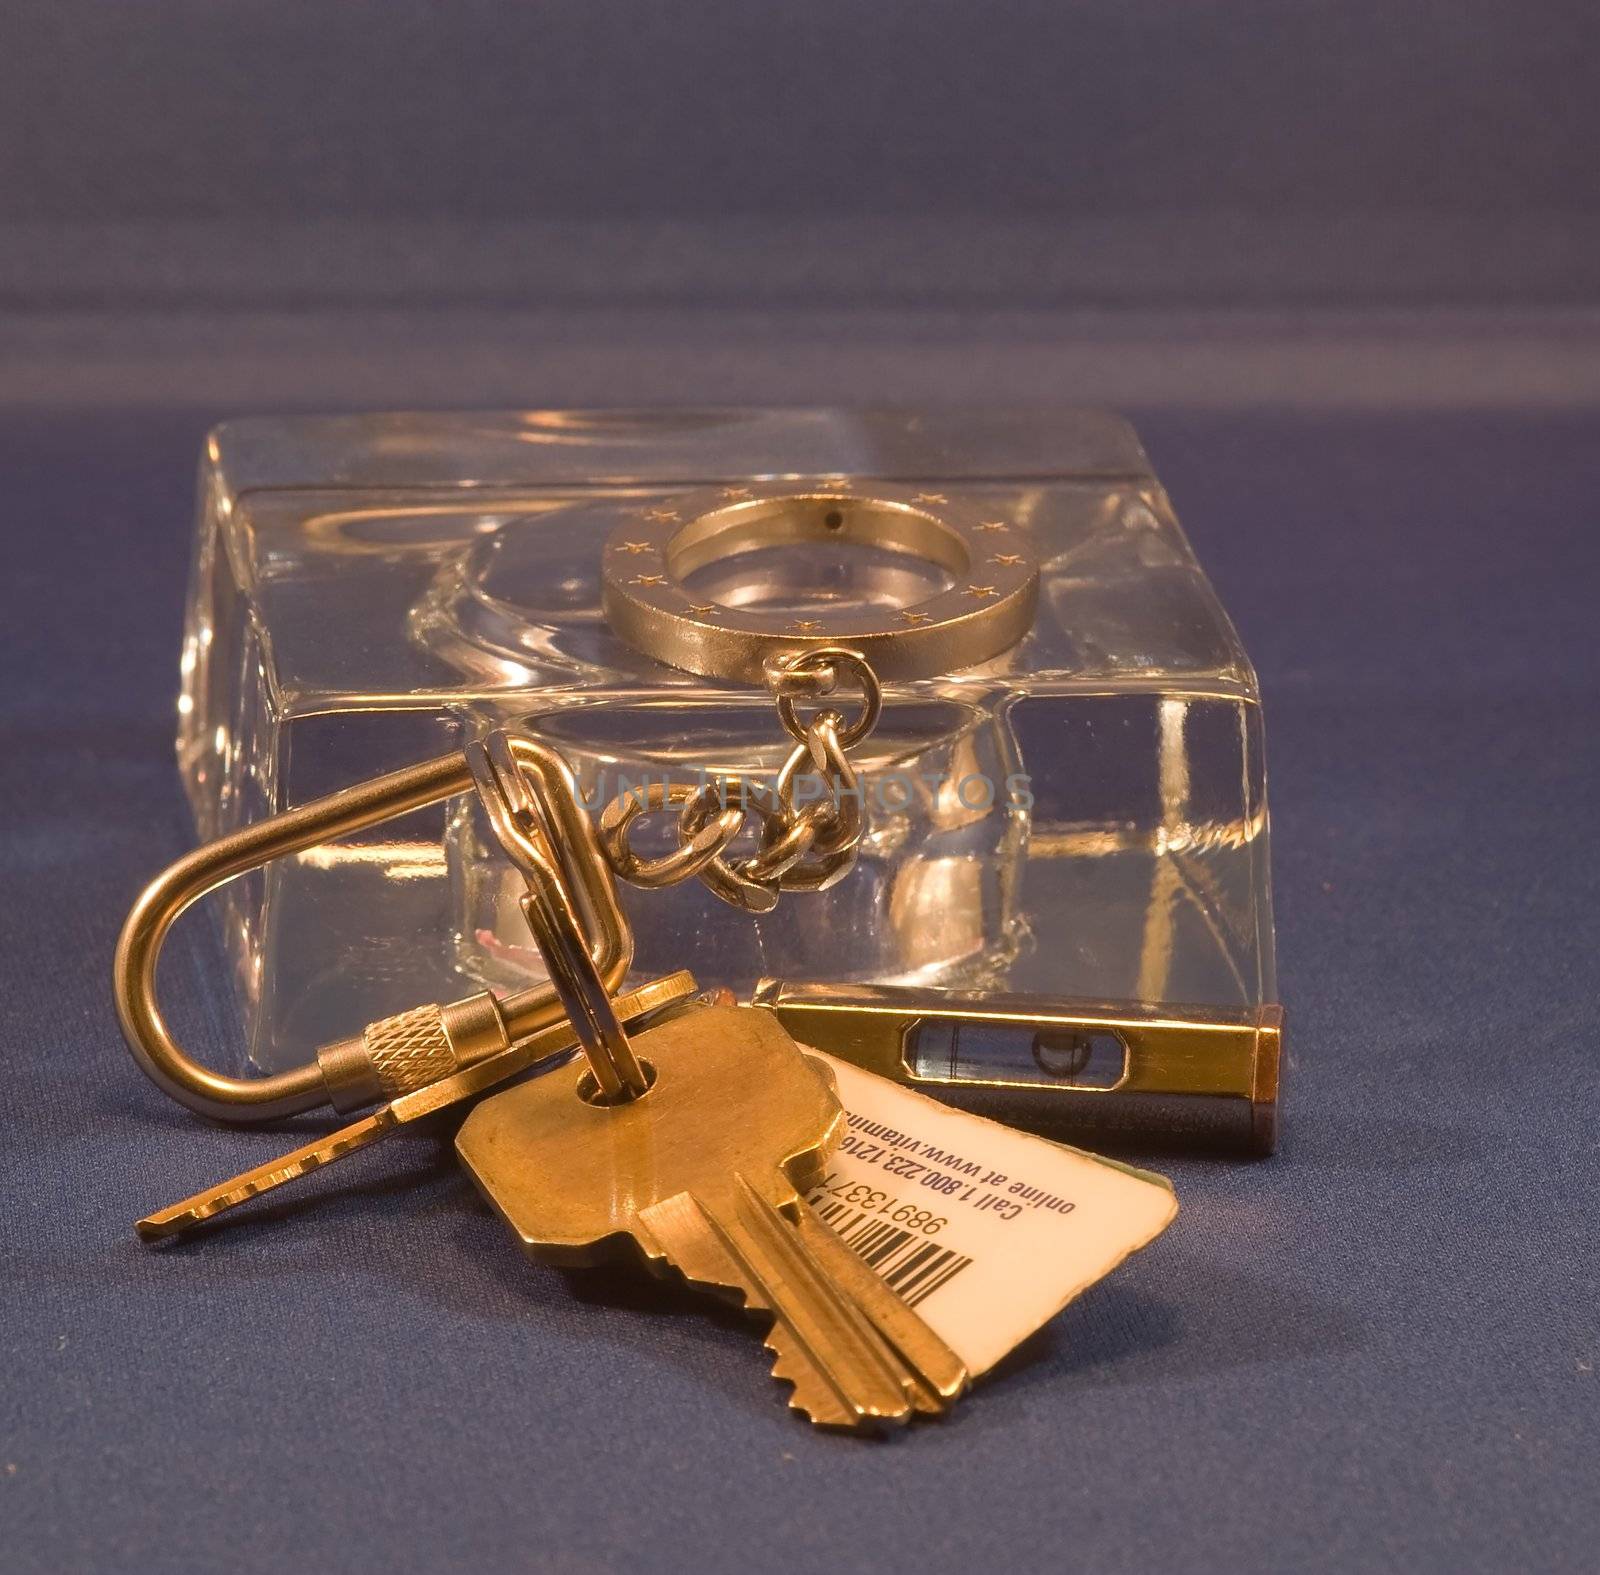 A keychain or key chain is a small chain, usually made from metal or plastic, that connects a small item to a keyring.